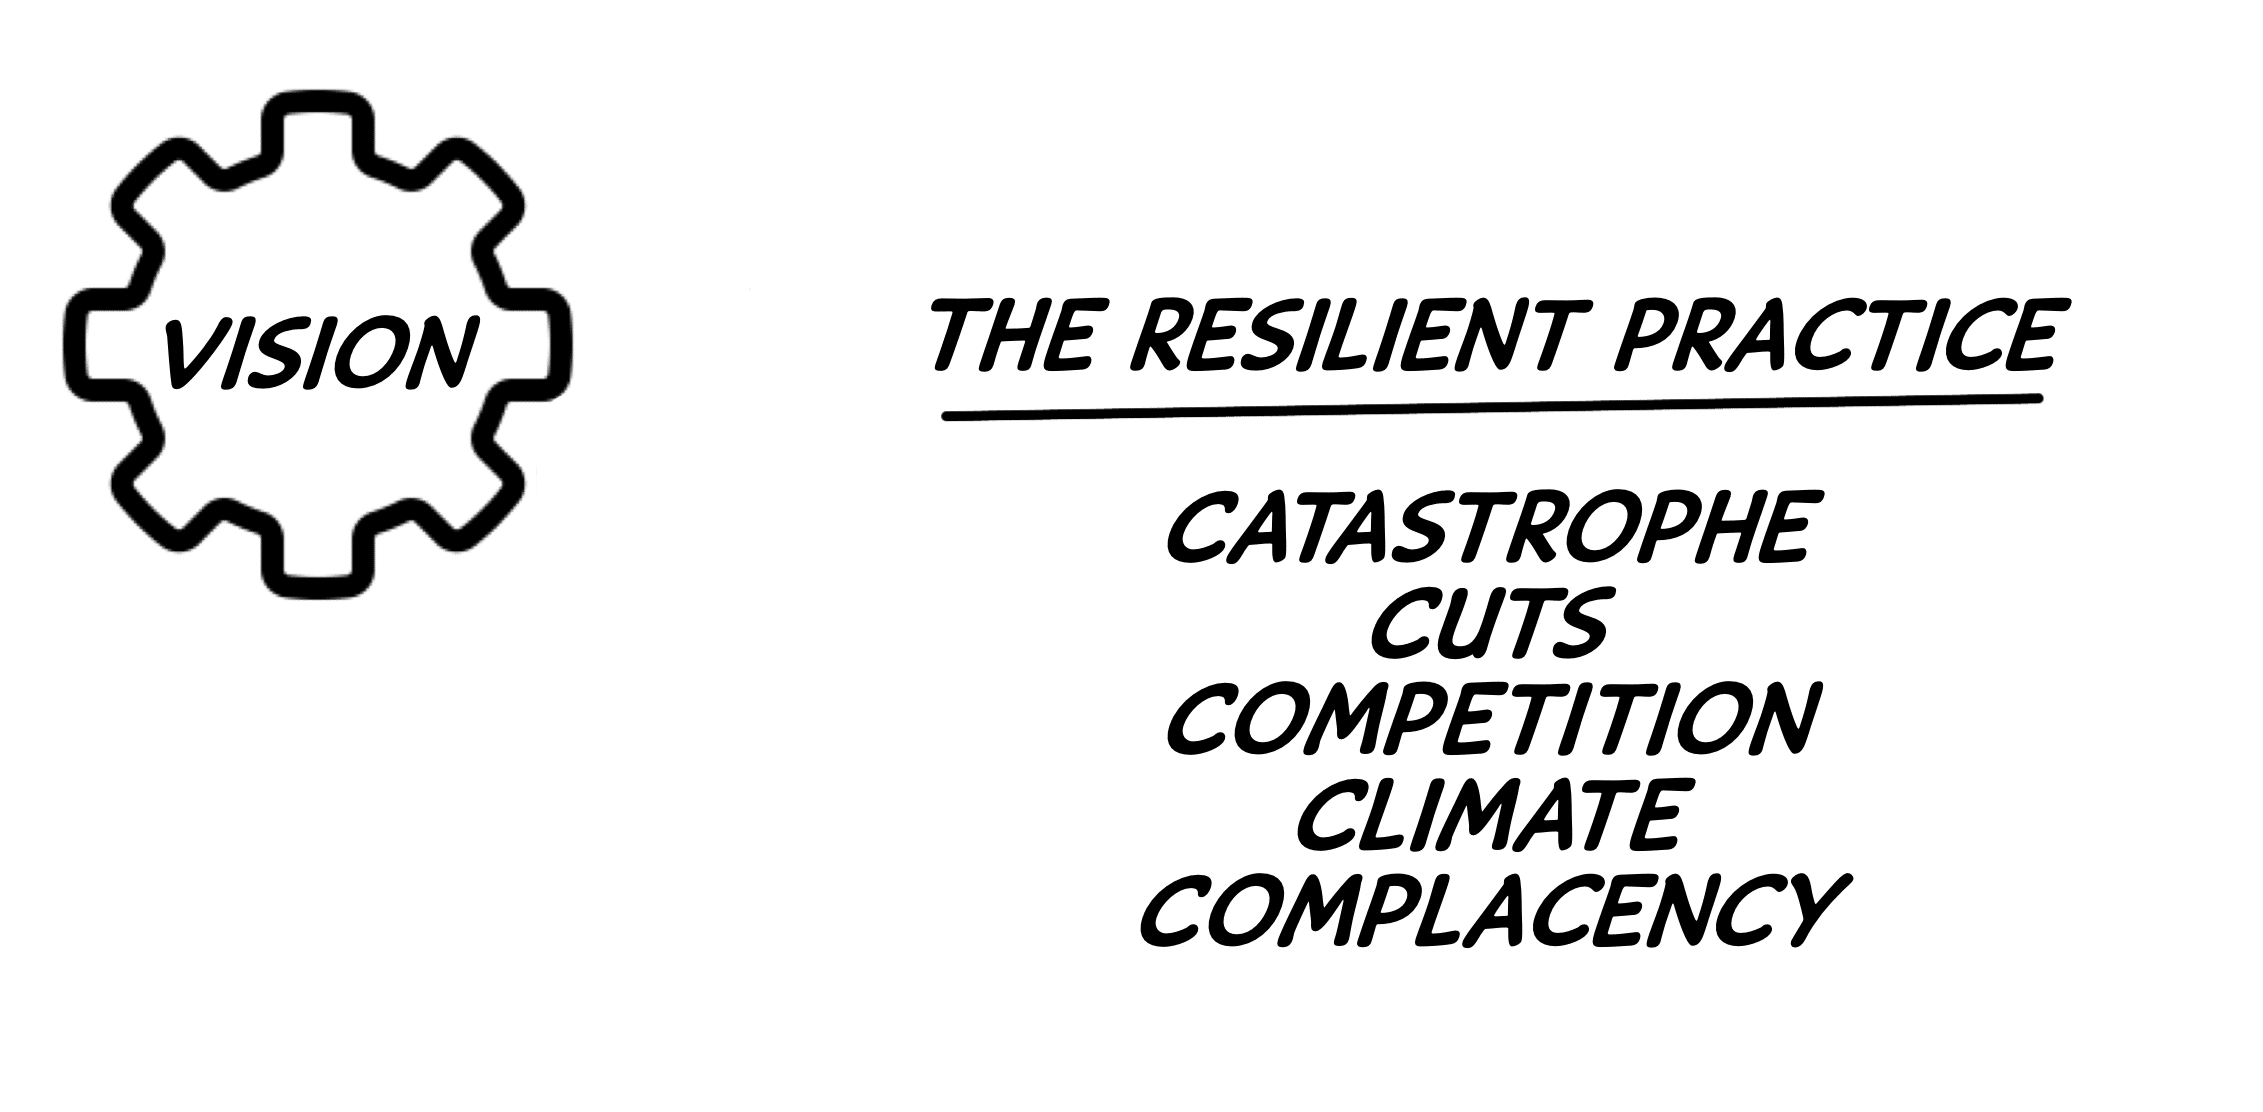 Vision: The Resilient Practice